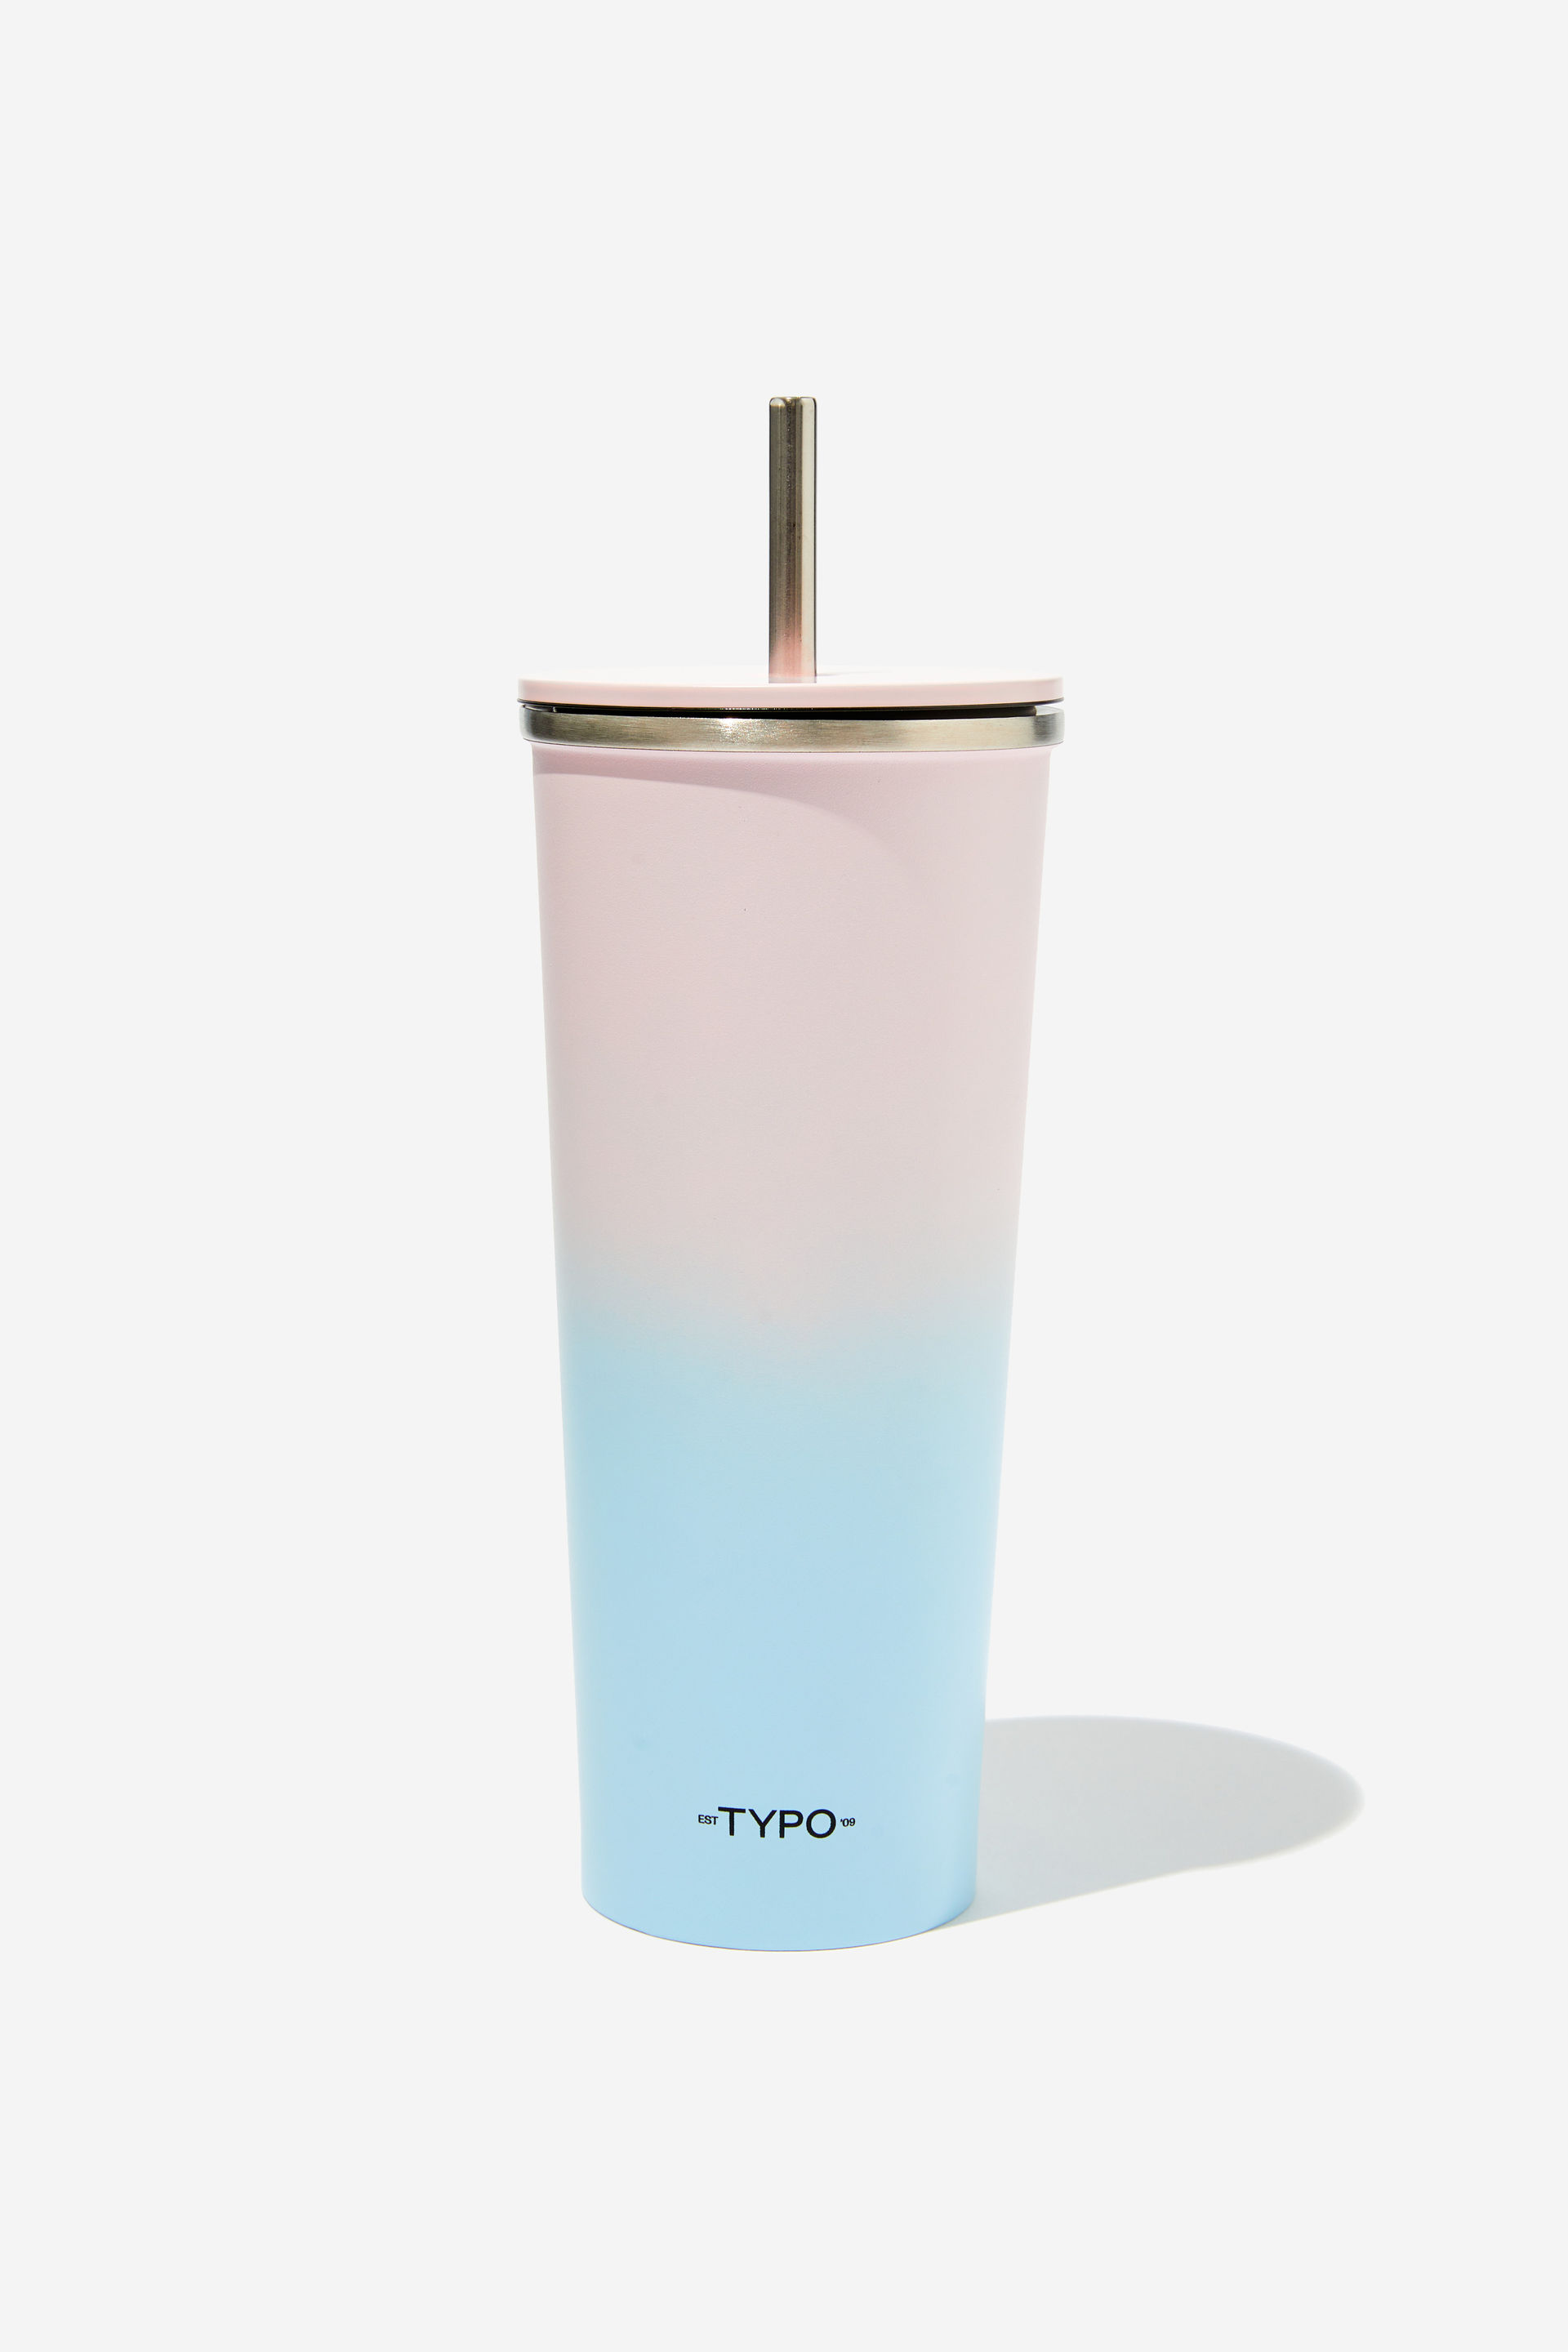 Typo - Metal Smoothie Cup - Ballet blush arctic blue ombre